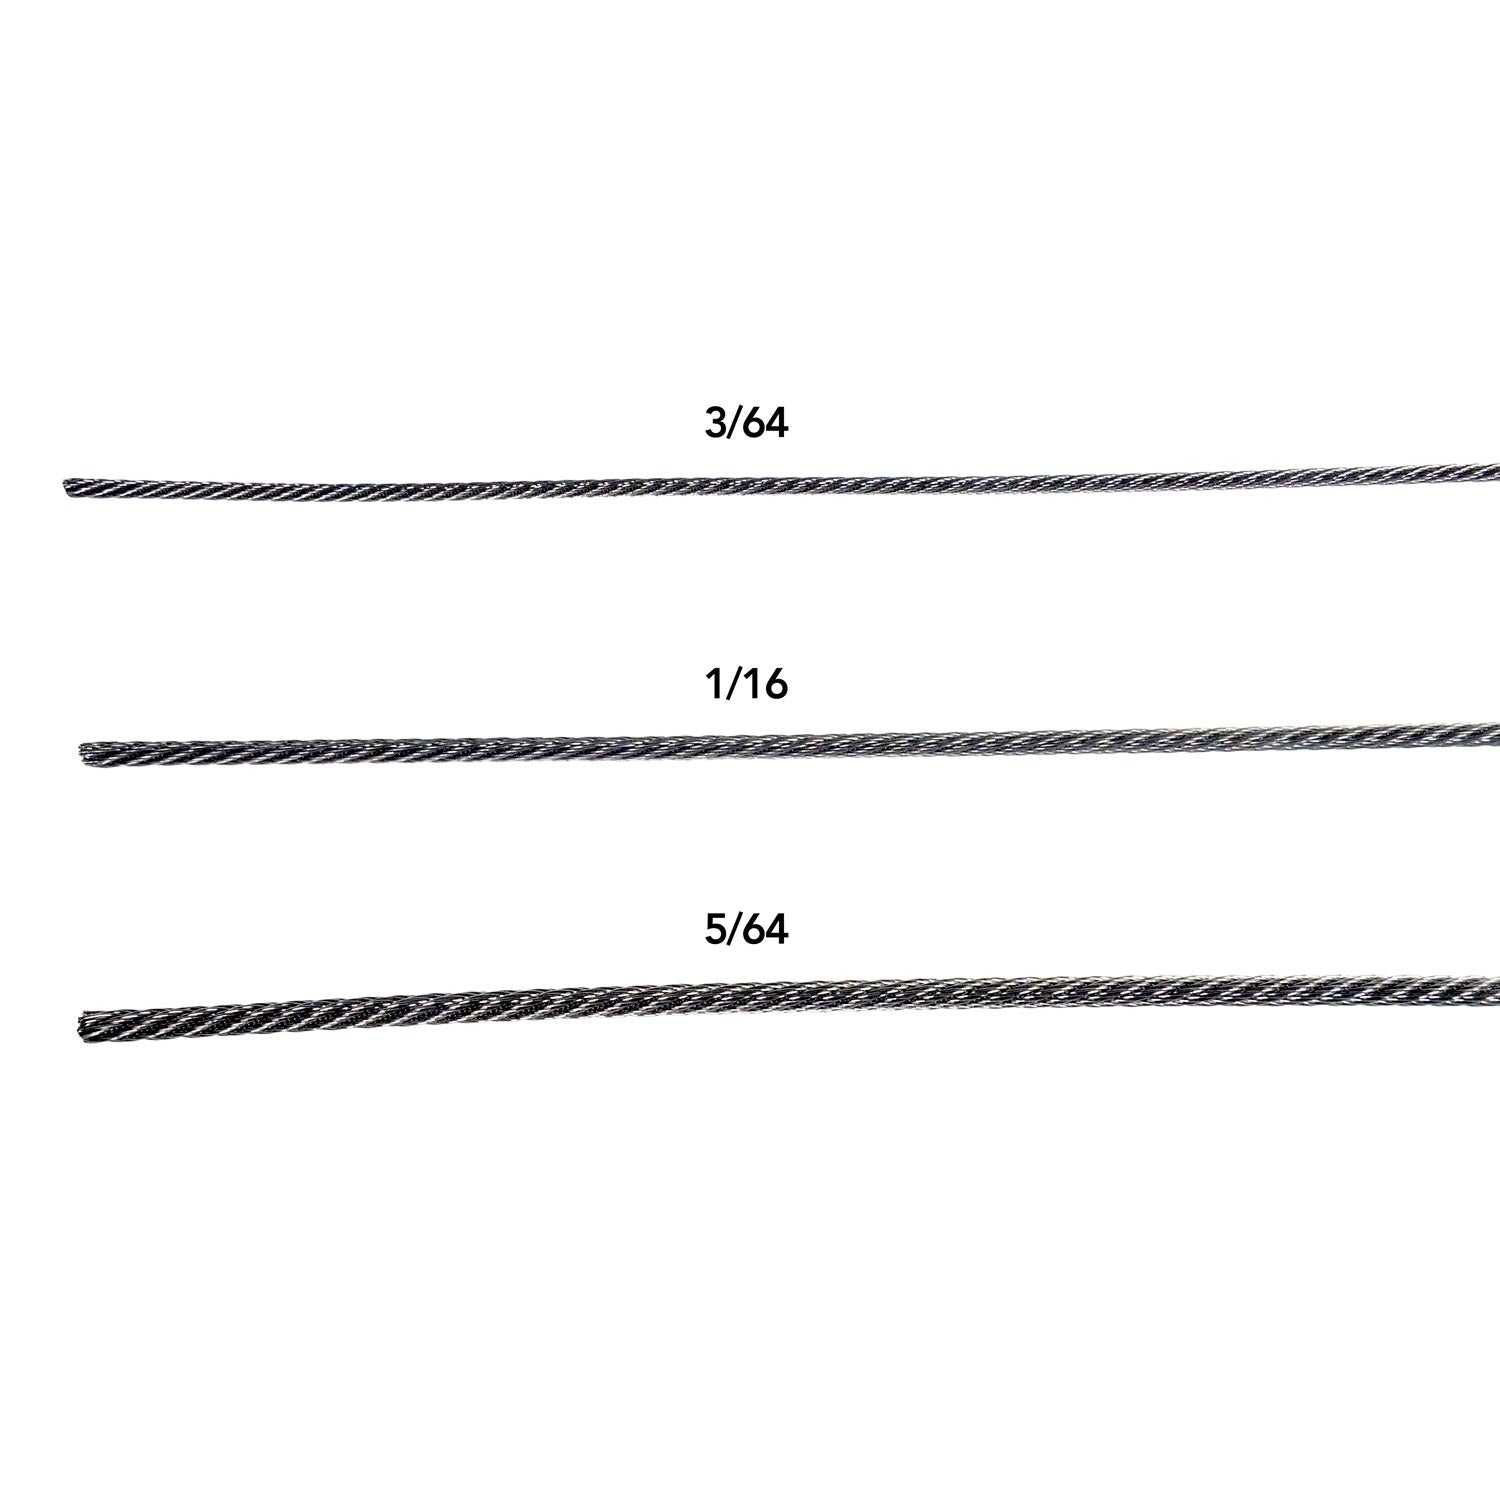 Rite Angler 7x7 Cable size chart